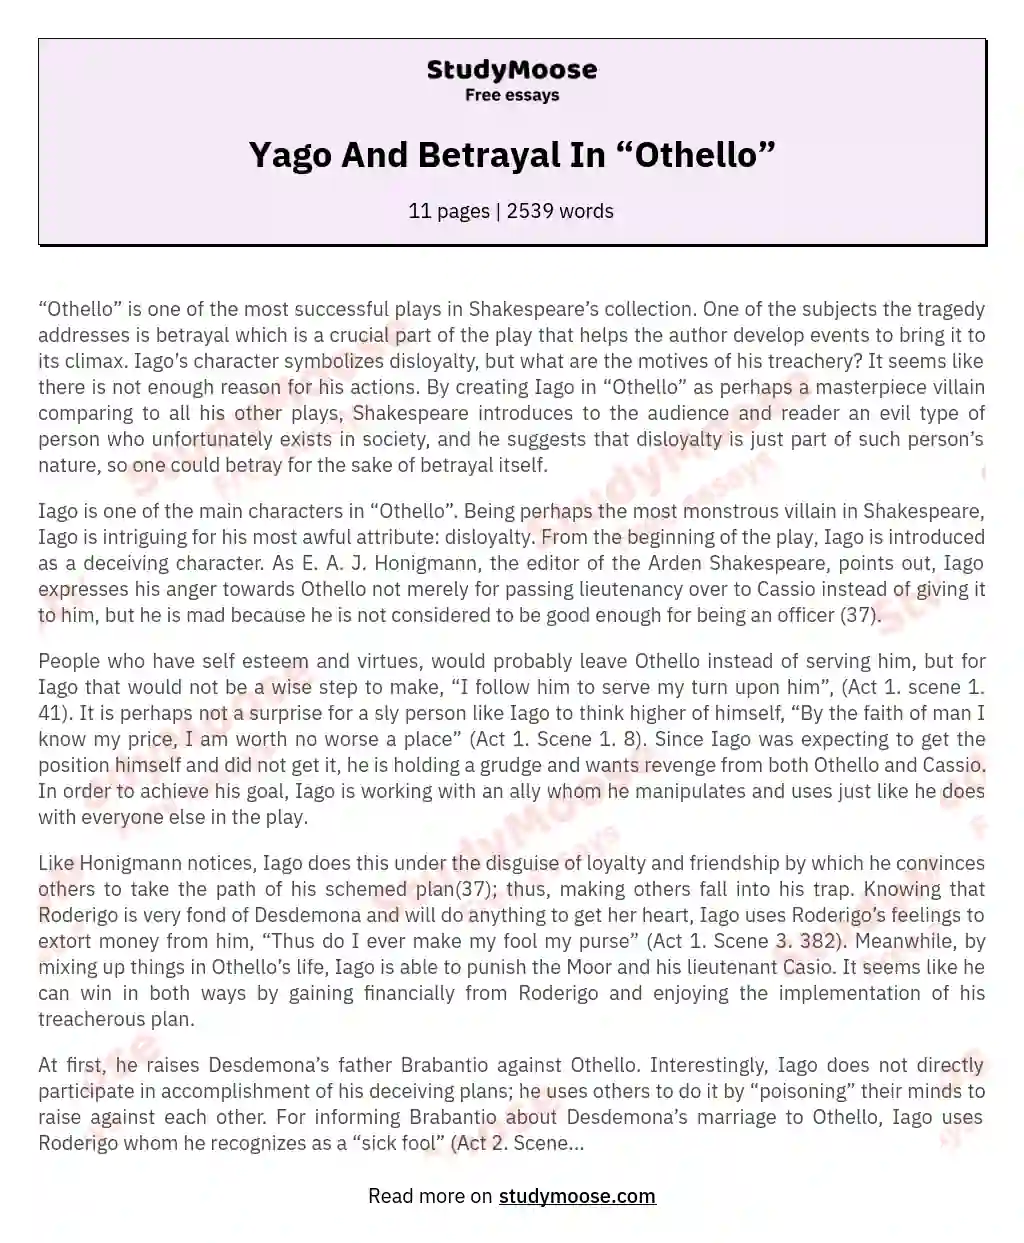 Yago And Betrayal In “Othello”